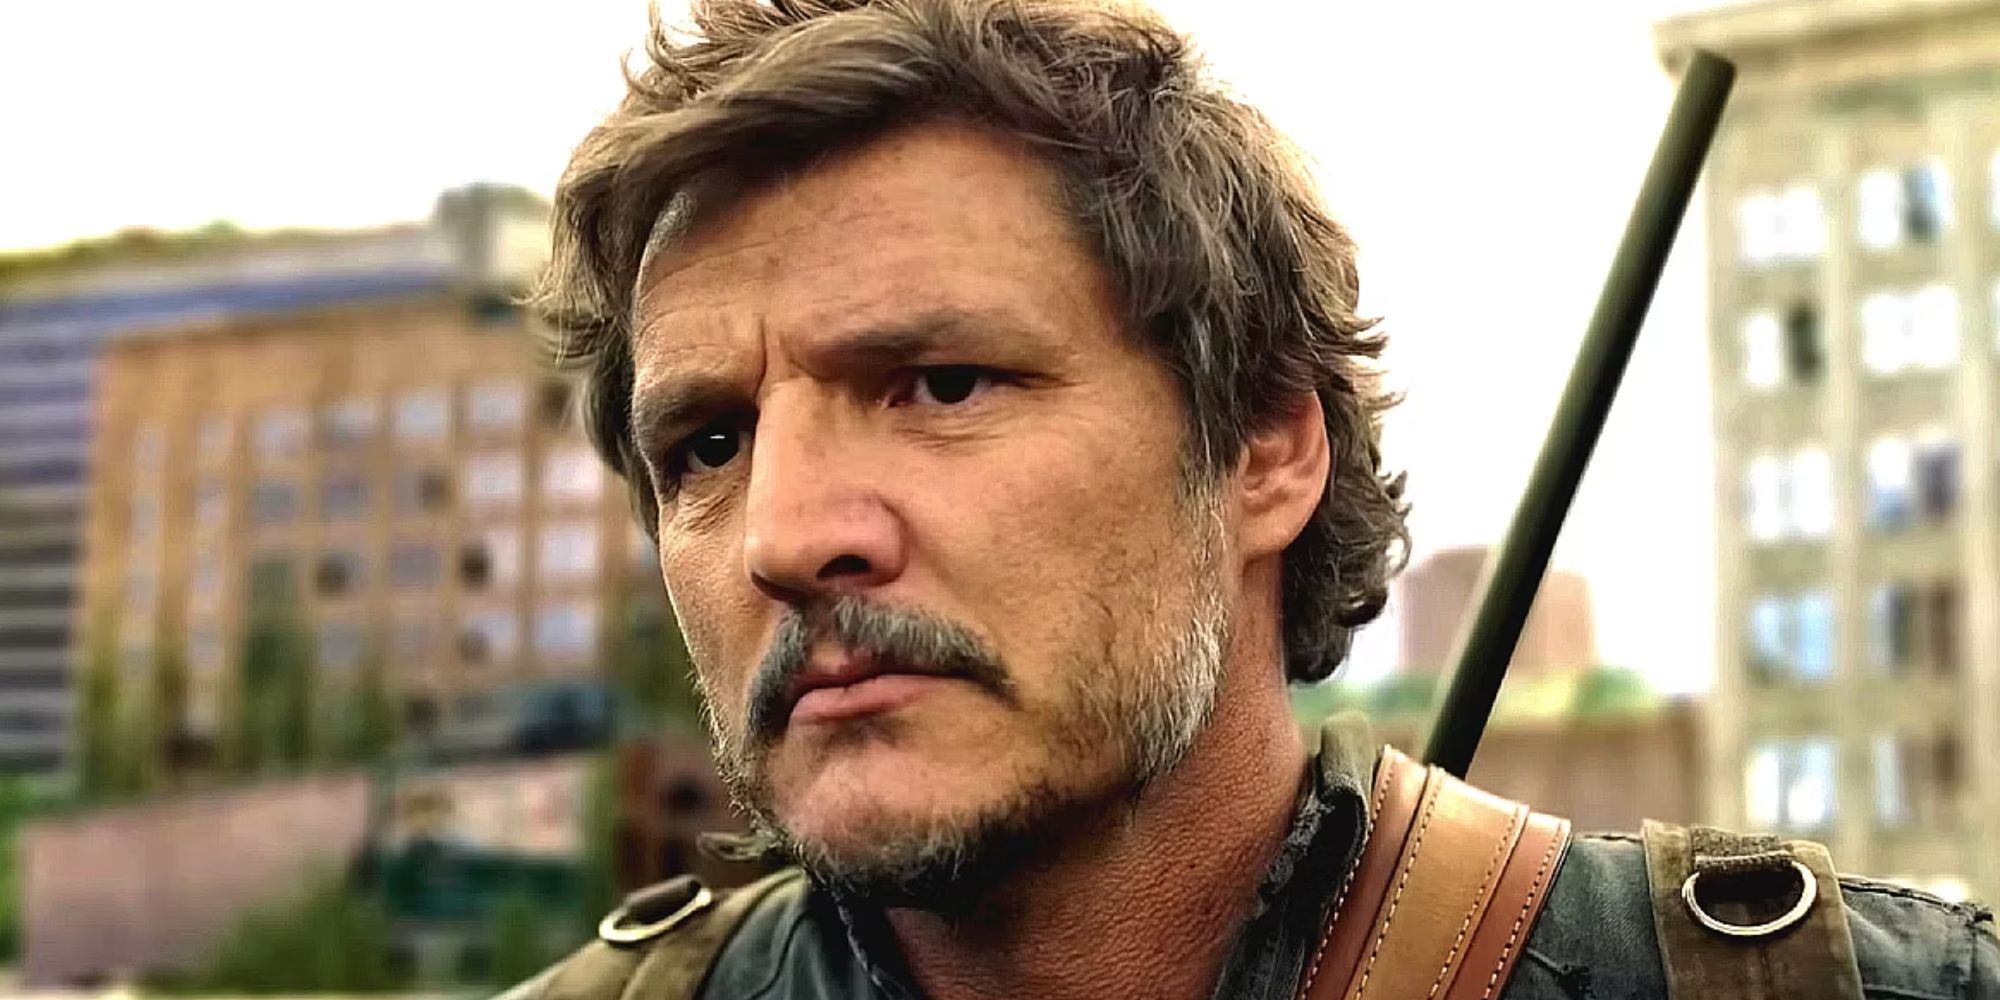 Pedro Pascal looking serious as Joel Miller in The Last of Us